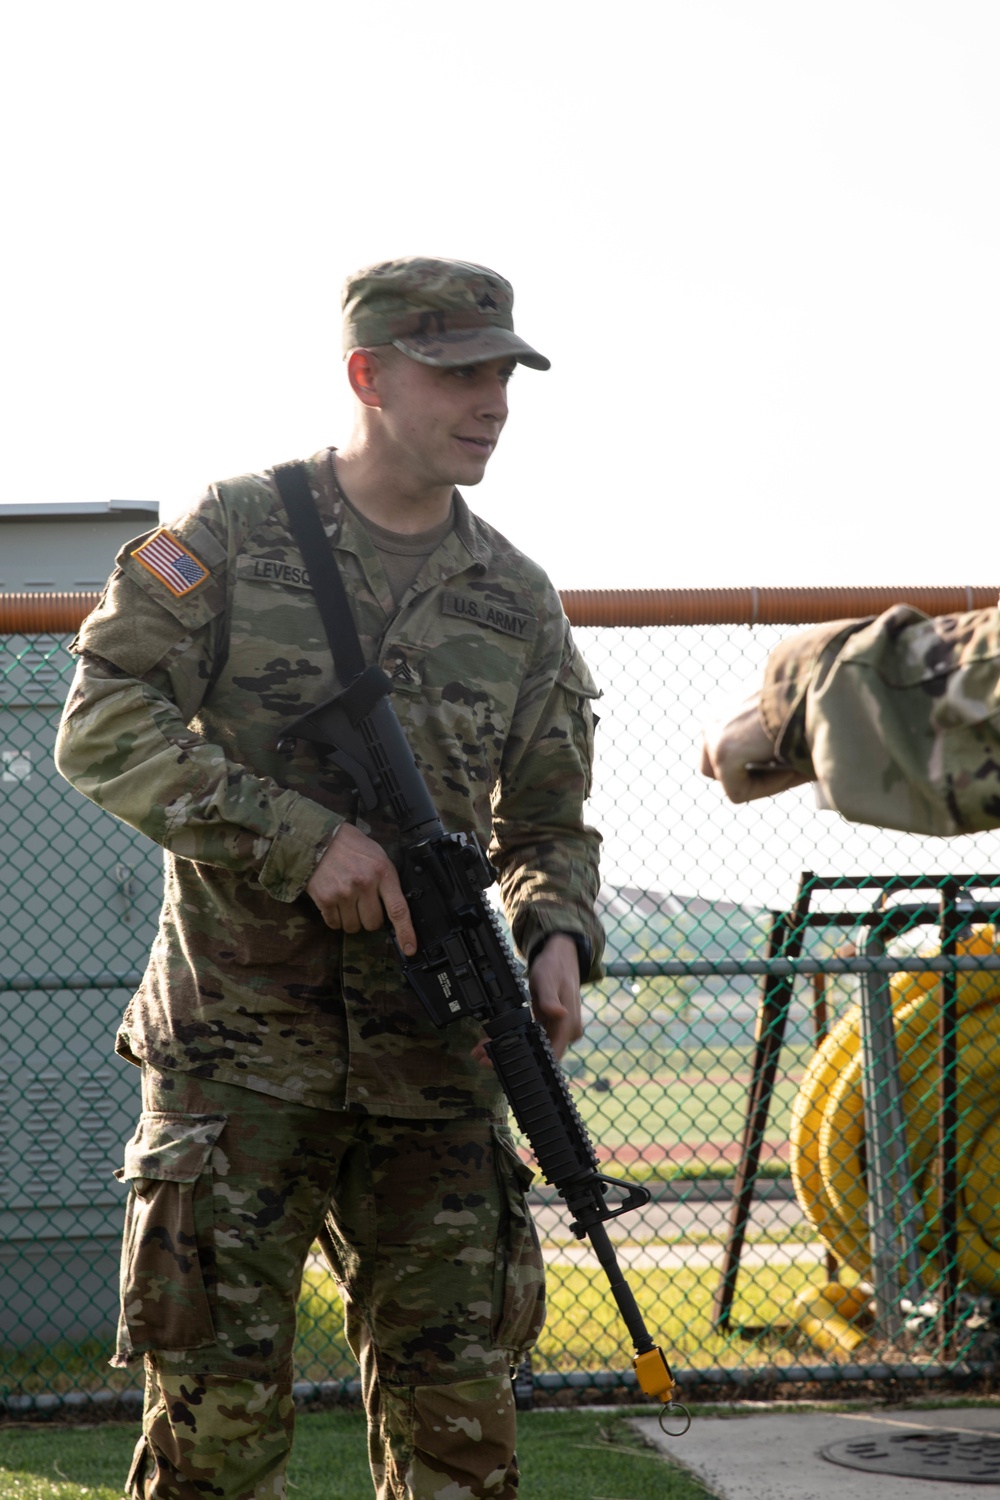 USARPAC BWC 2021: South Korea, Sgt. Steven Levesque, an 8th Army soldier, conducts a weapons check on an M4 carbine